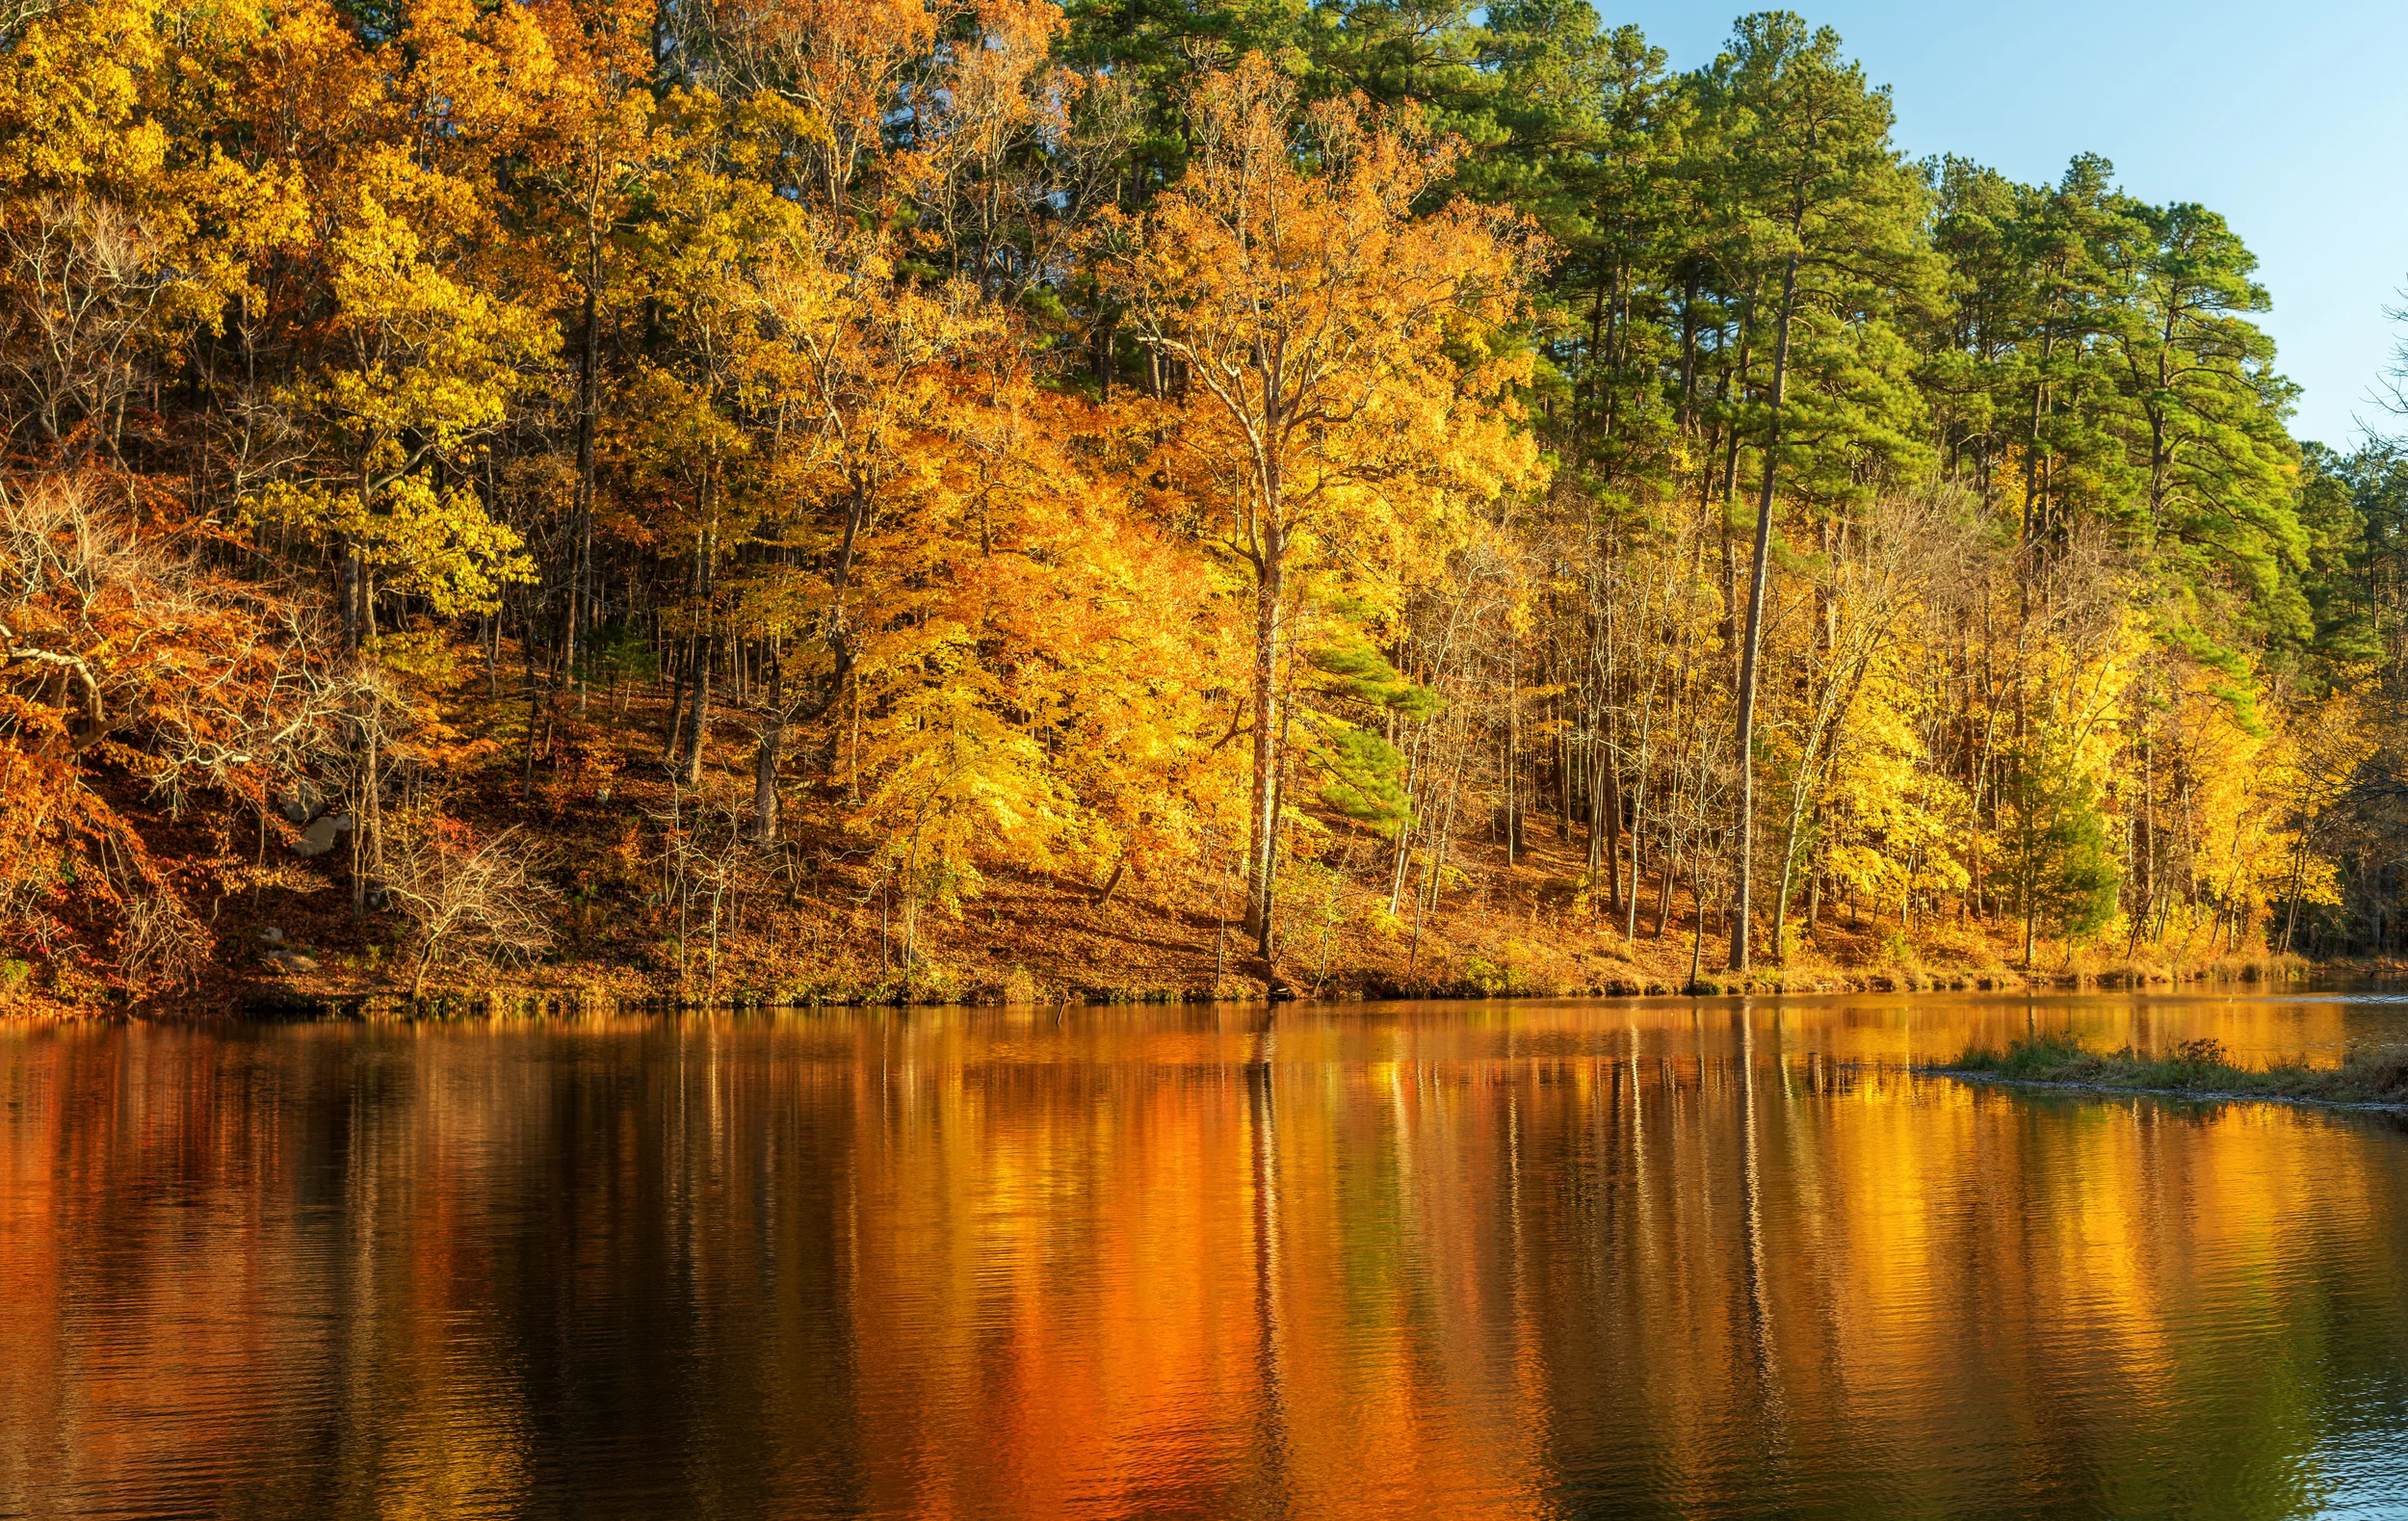 Lake with trees set in the Autumn